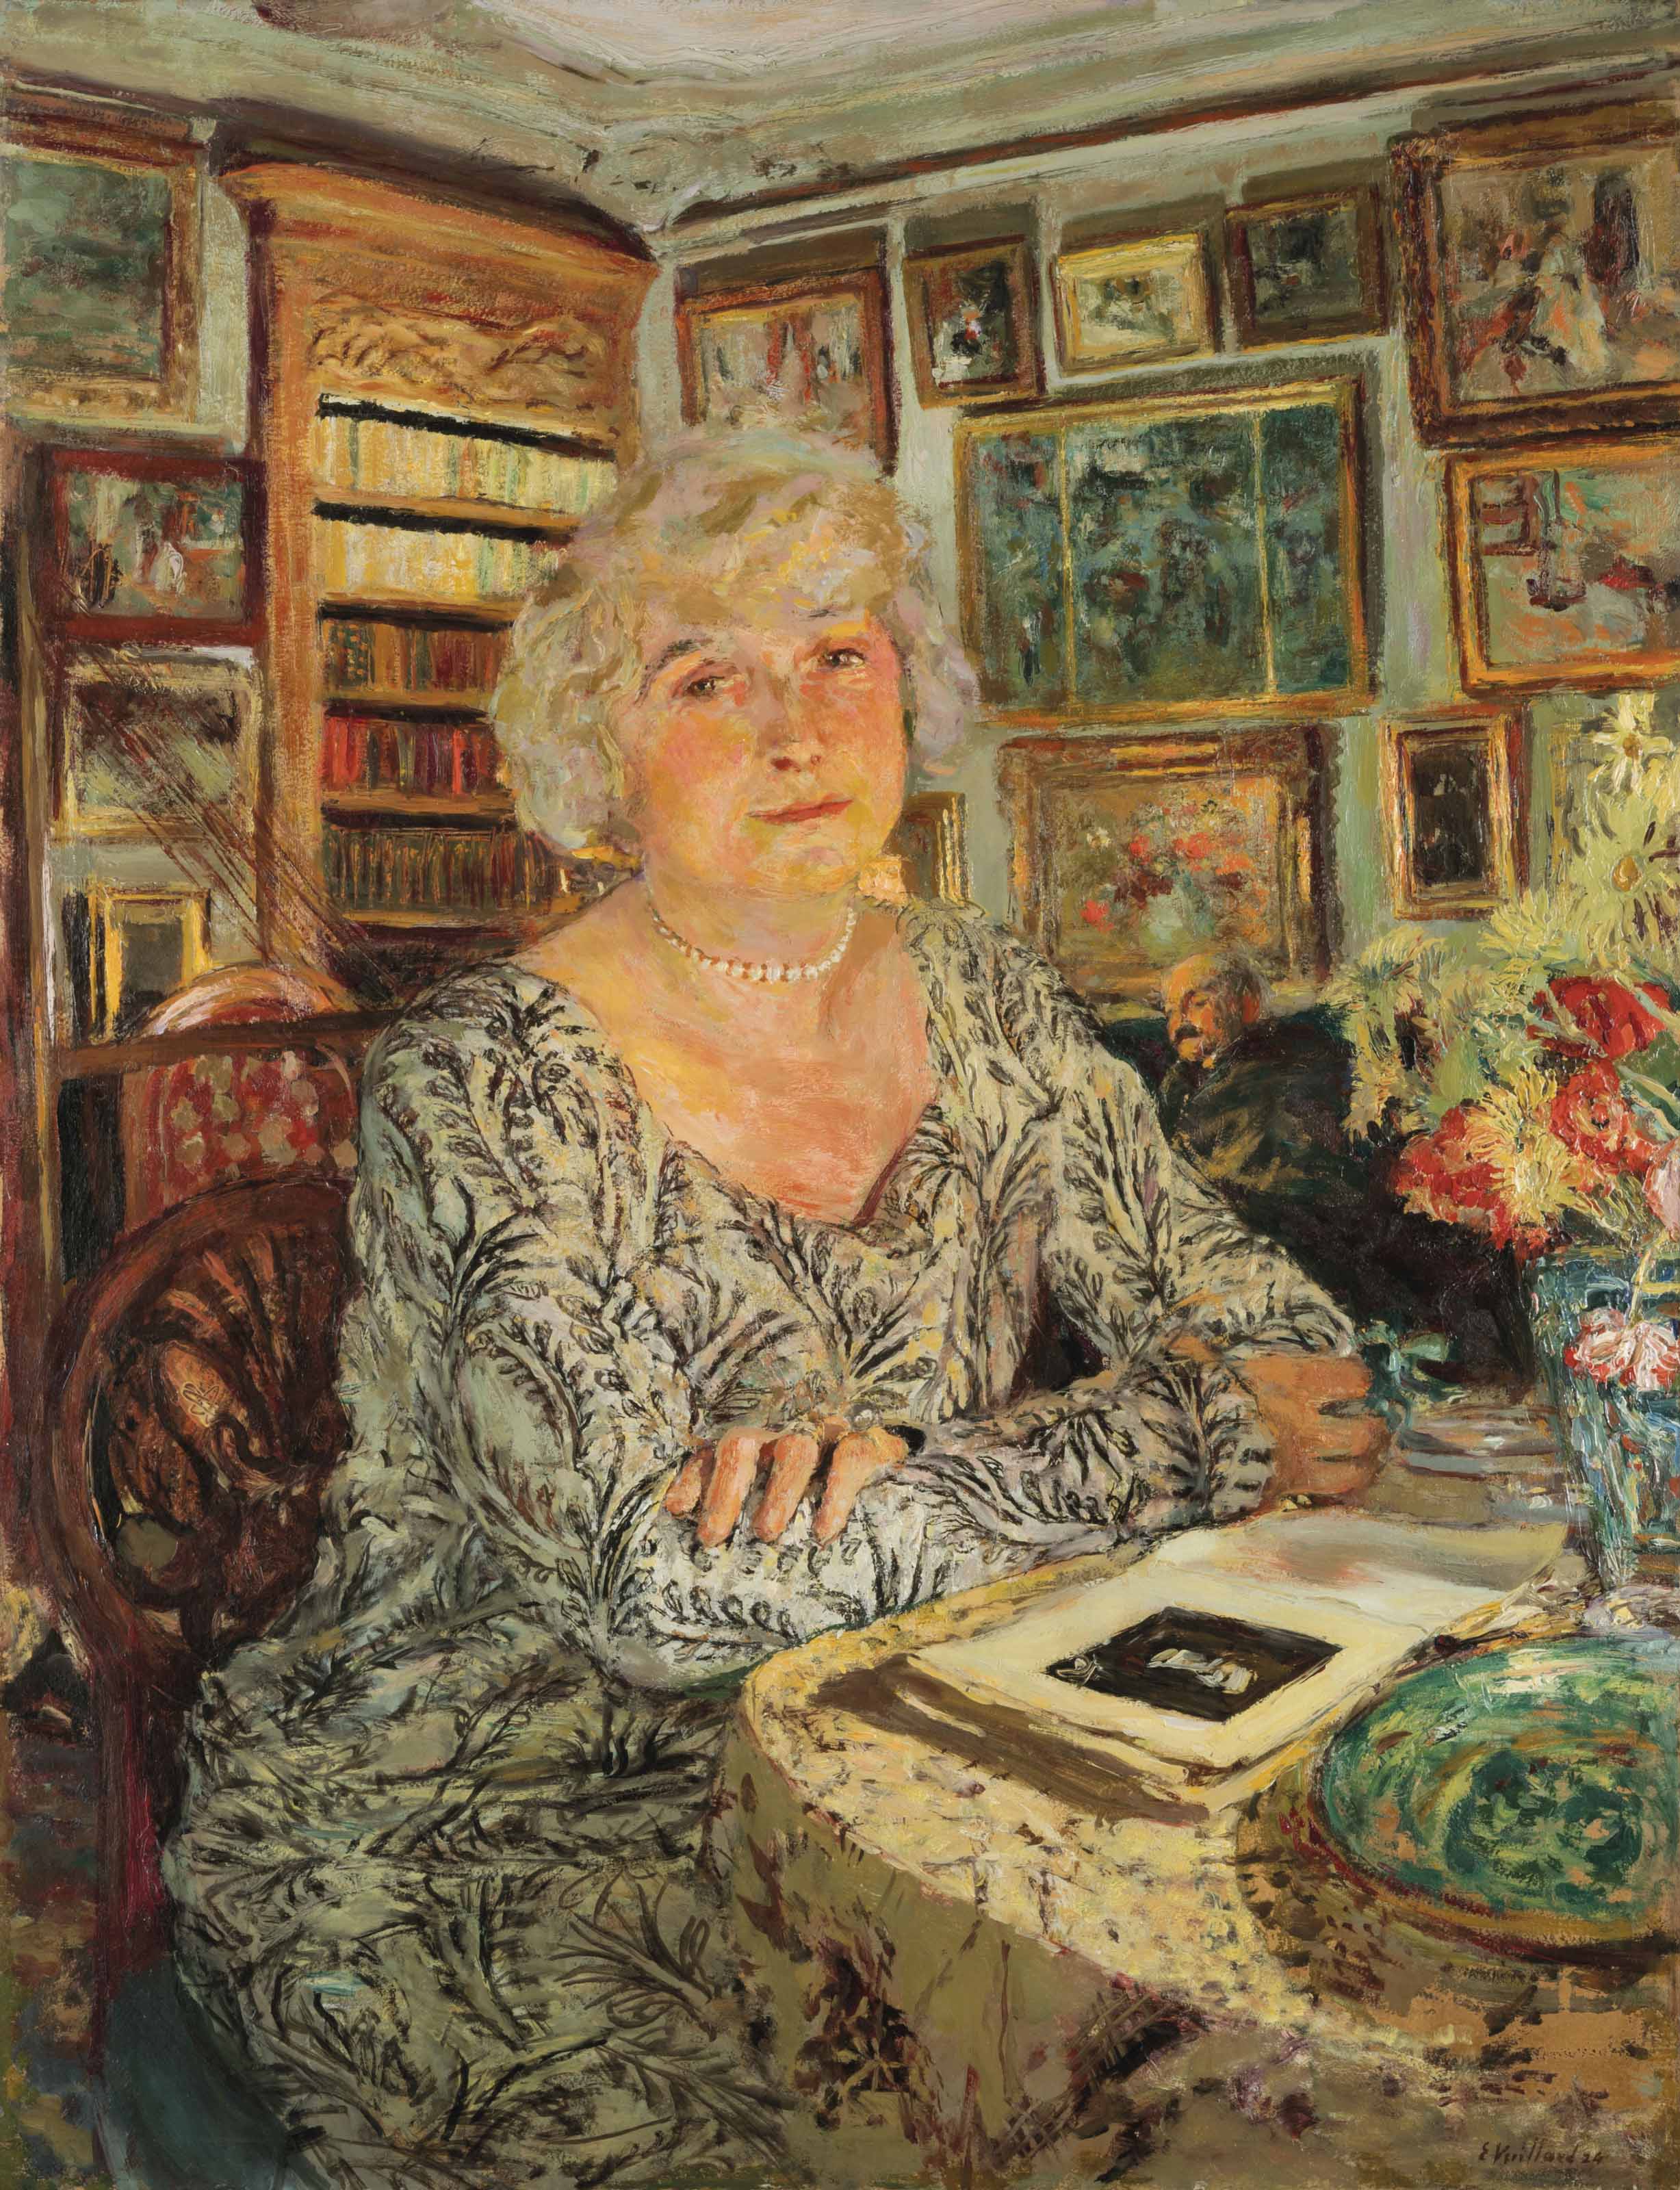 Lucie Hessel by Édouard Vuillard - ca. 1924 - 88 x 67,9 cm private collection